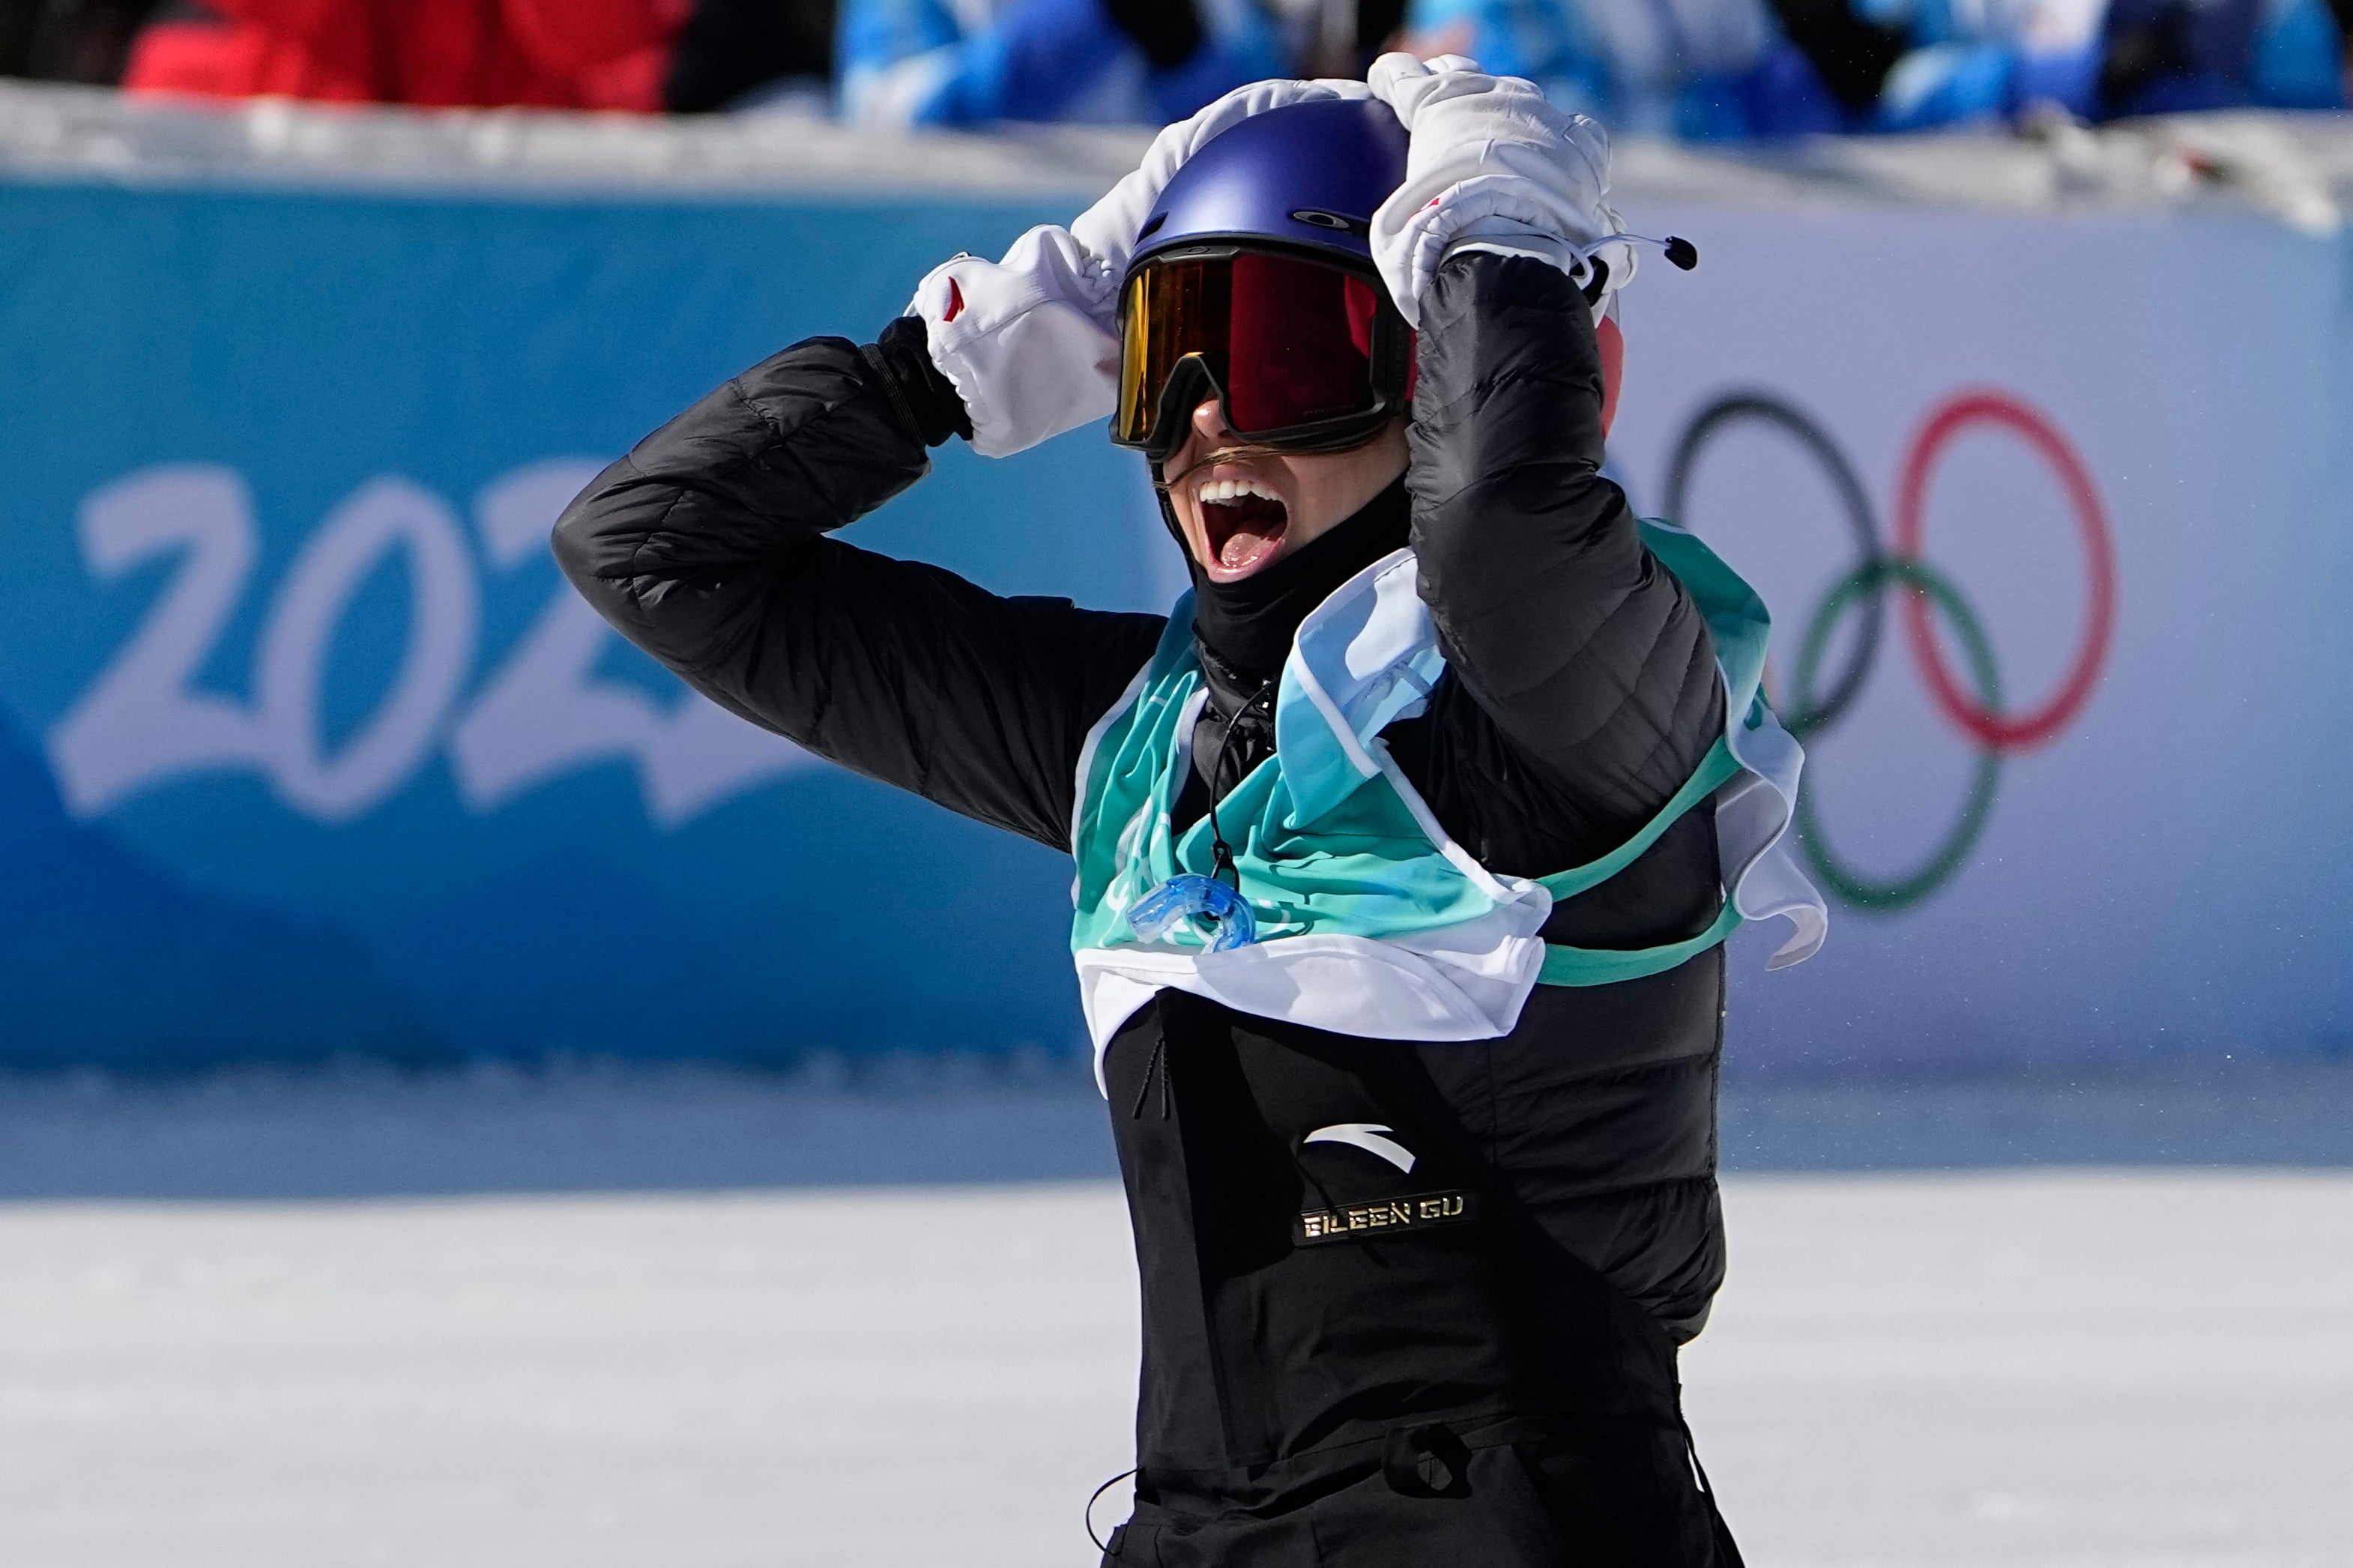 Chinese American skier, Eileen Gu, who chose to compete for China rather than the US